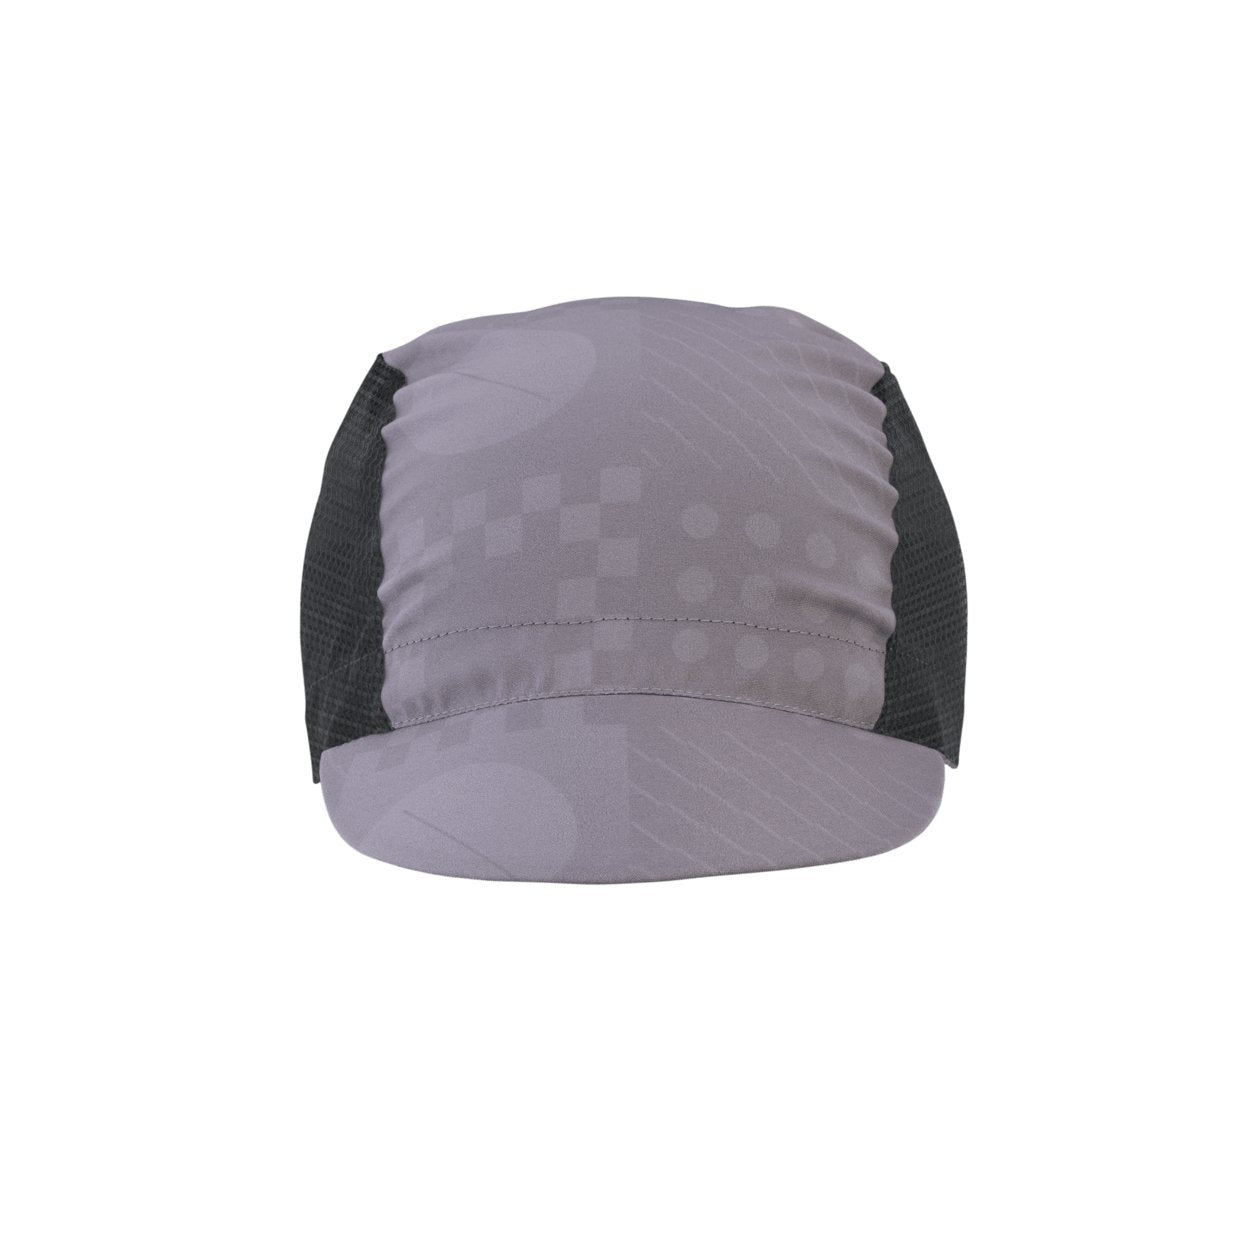 ION Cap VNTR 2024 - Worthing Watersports - 9010583105833 - Apparel - ION Bike